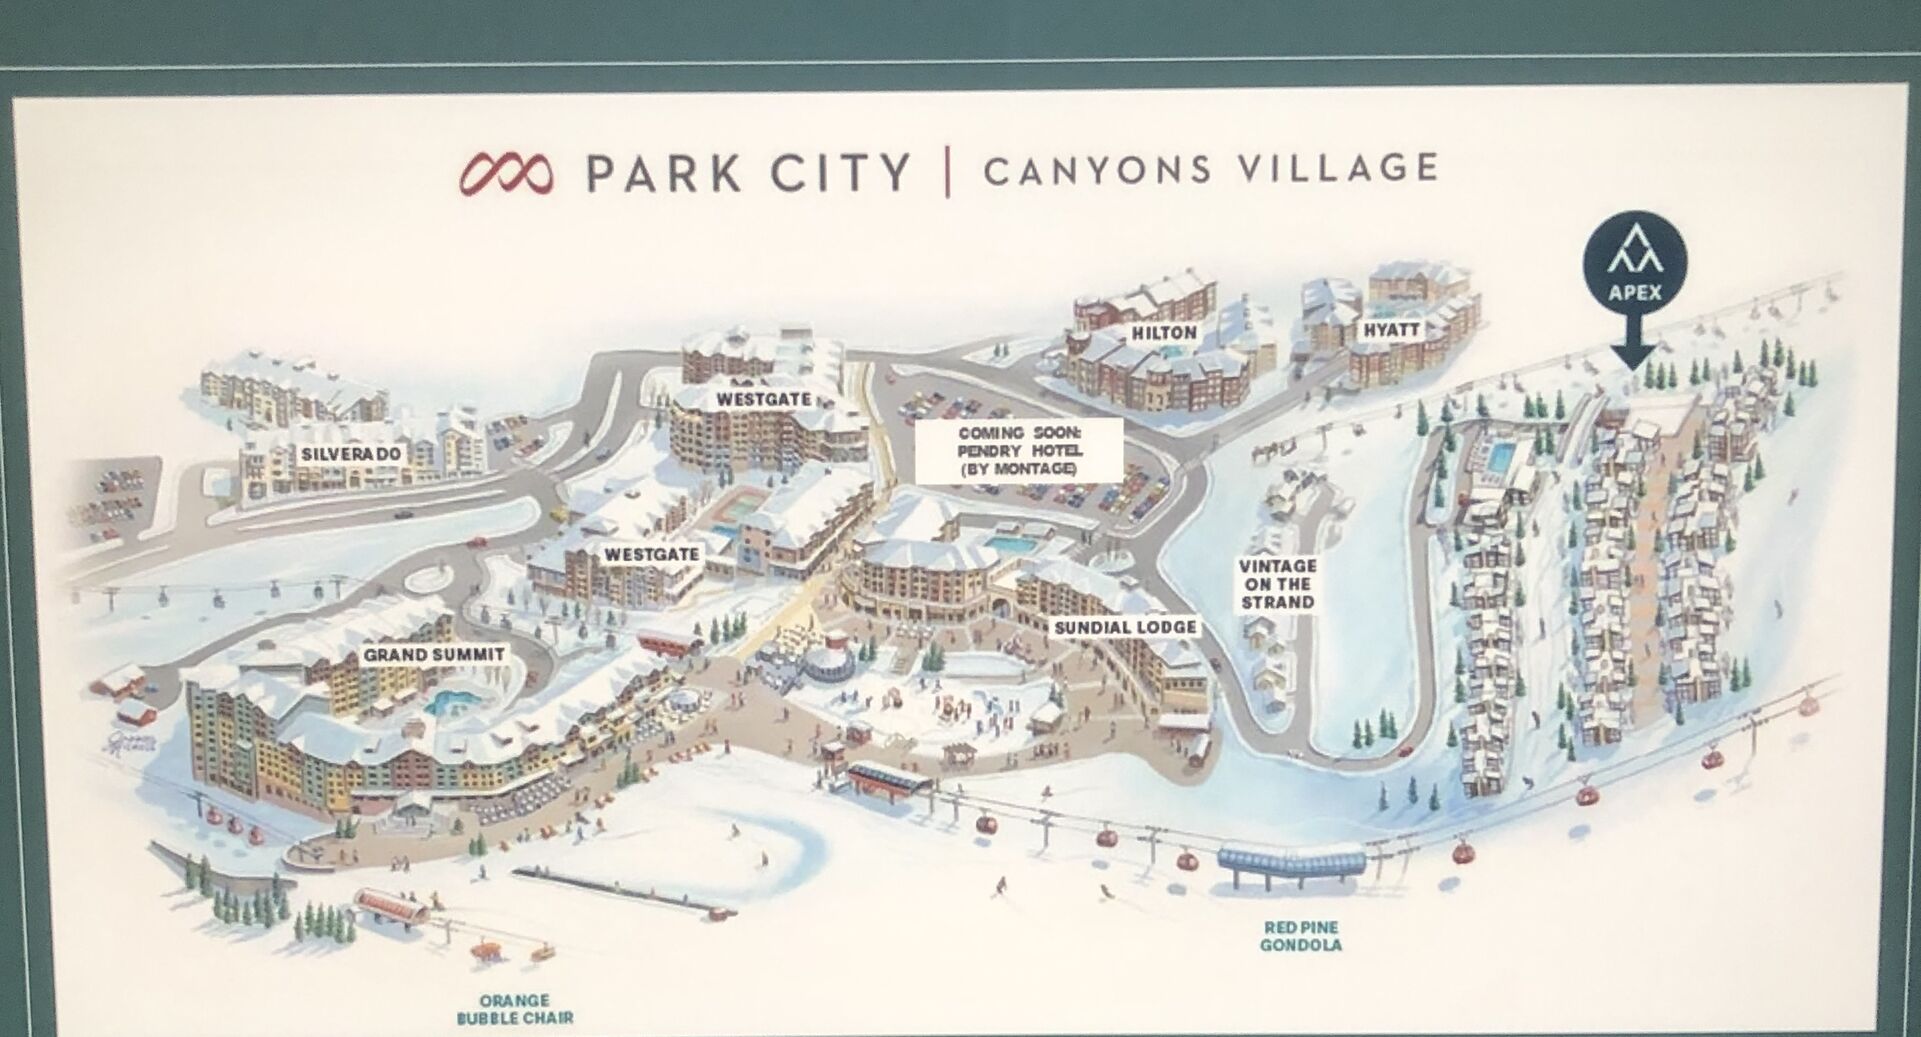 Park City Canyons Village and the New Apex Community